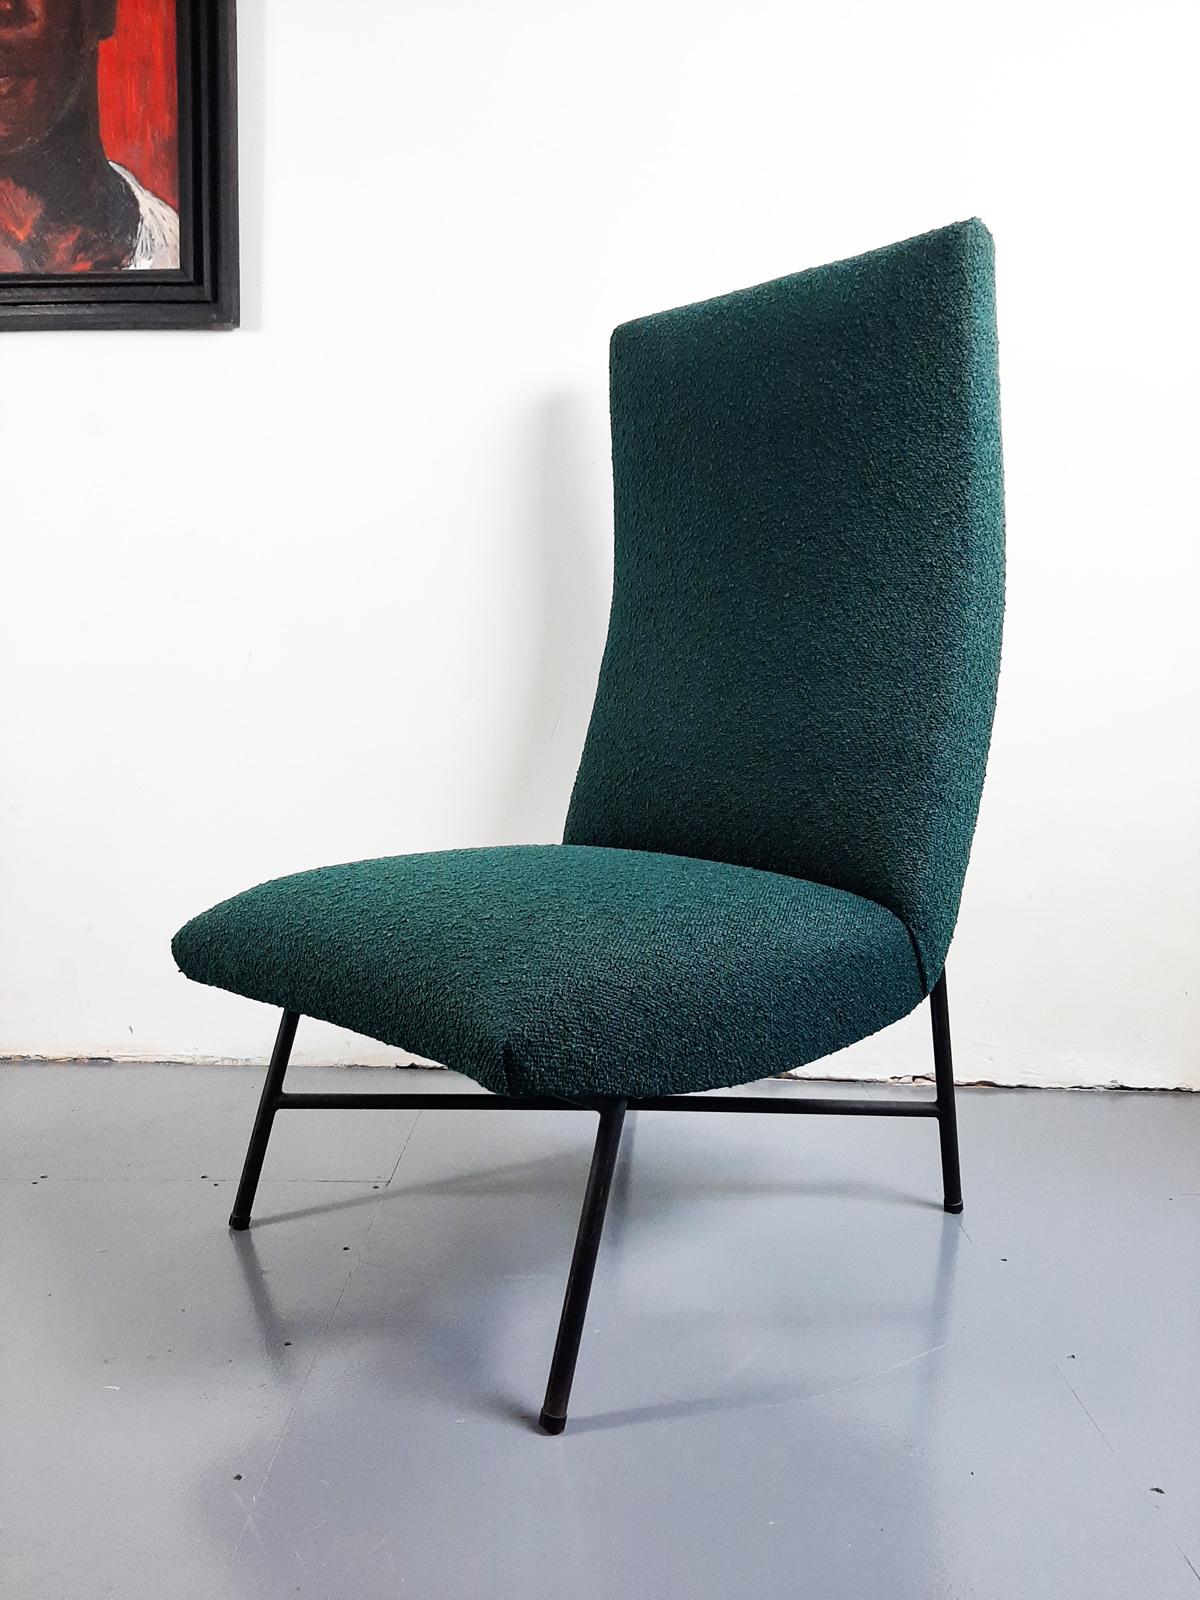 Mid-Century Modern Occasional Chair by Genevieve Dangles, 1950 For Sale